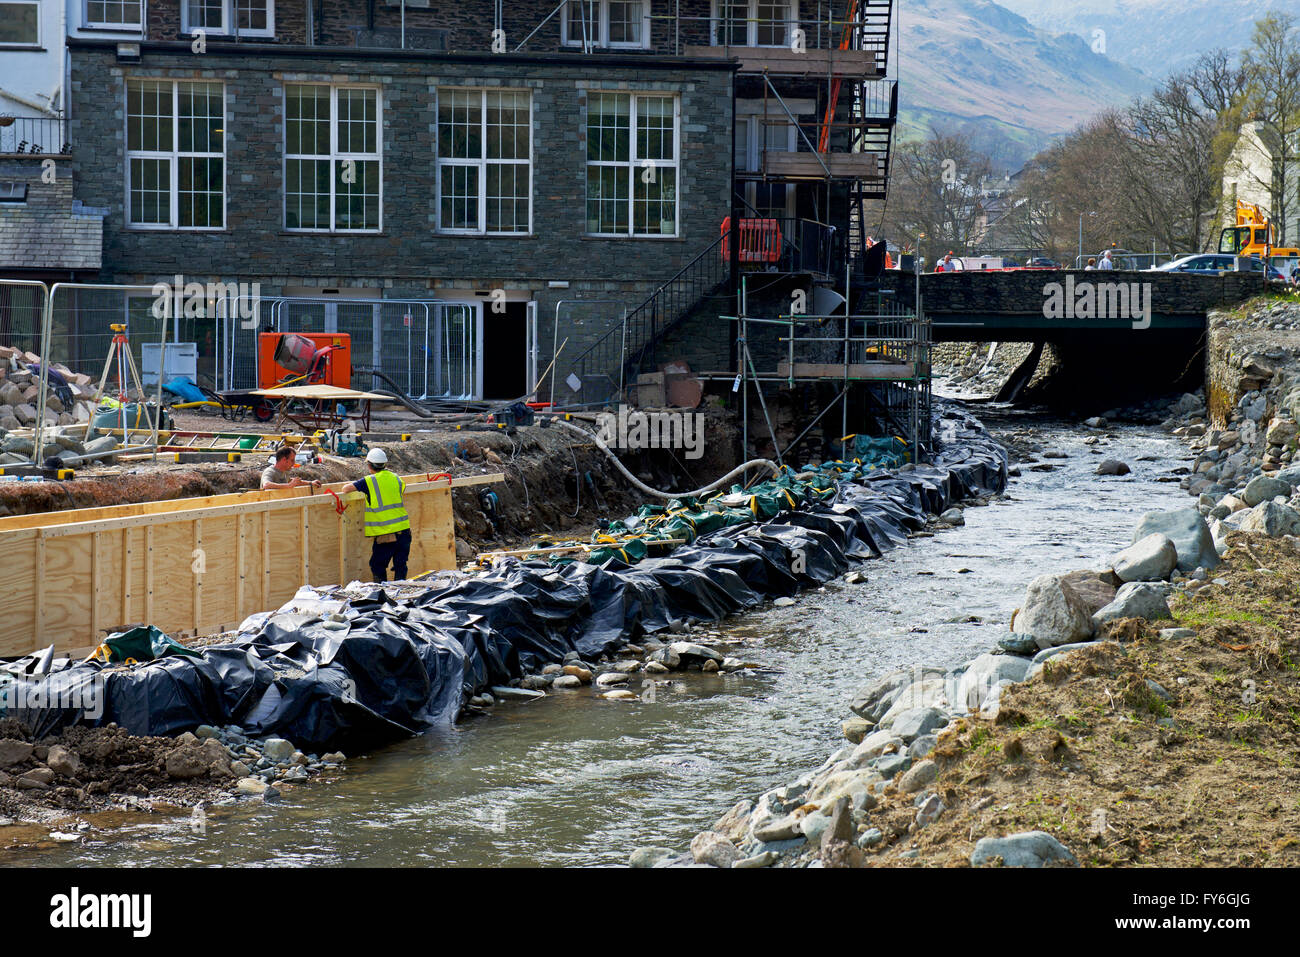 Remedial work being undertaken in the village of Glenridding, after floods in the winter of 2015/16, Lake District, Cumbria UK Stock Photo